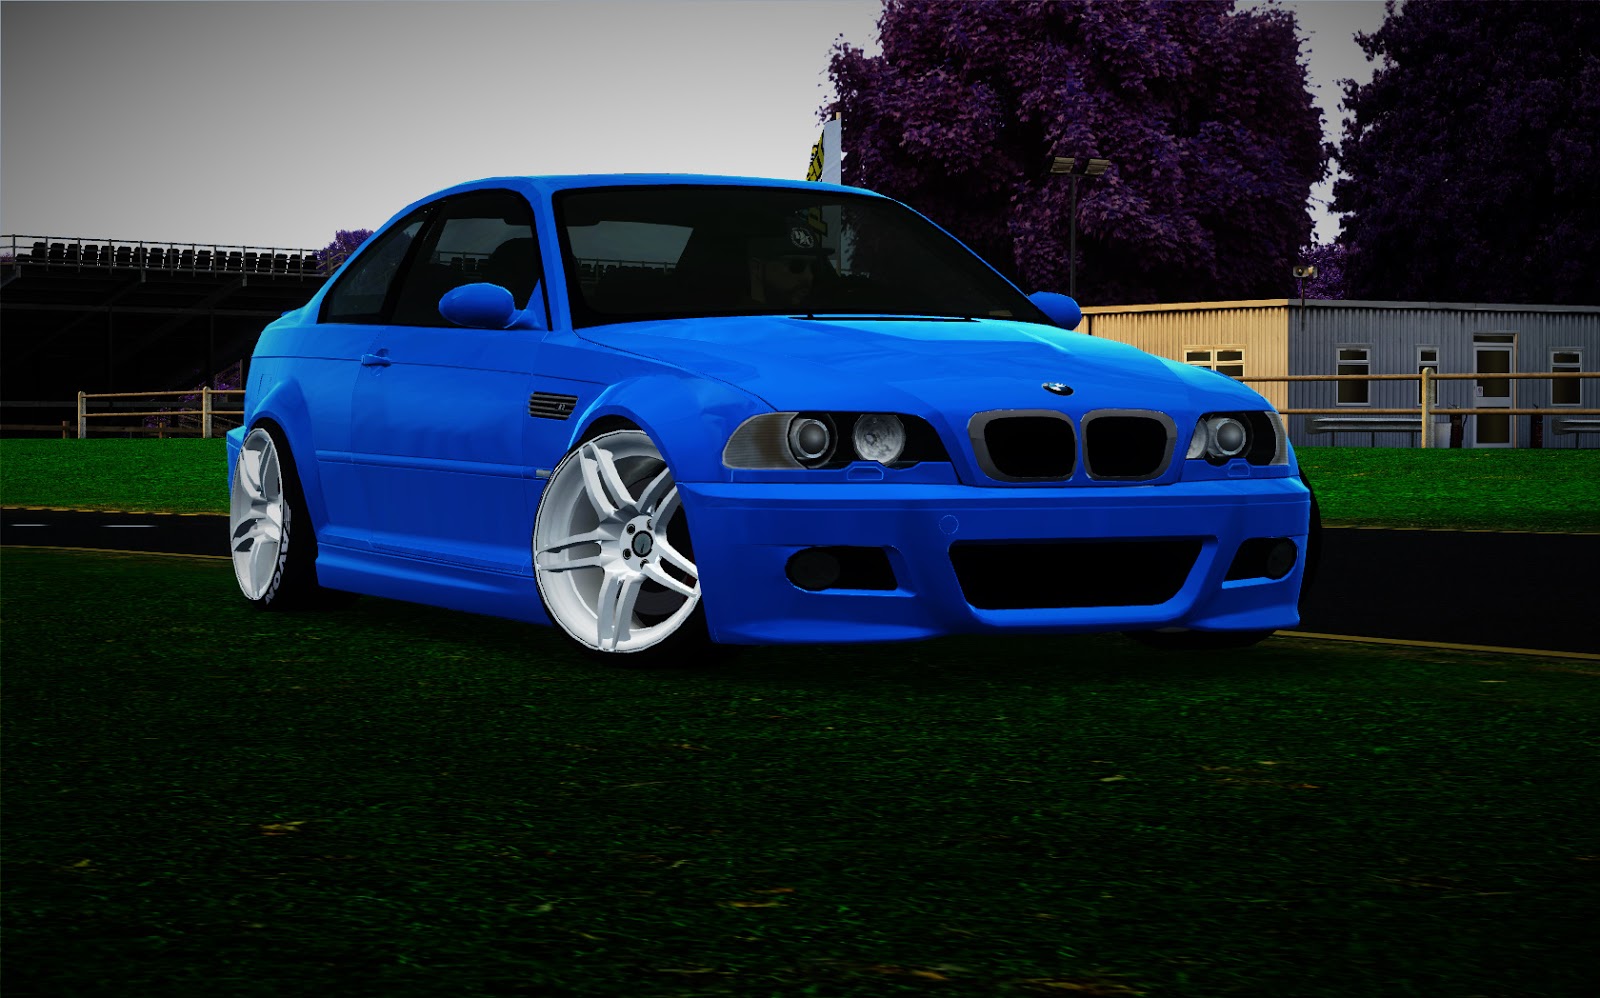 BMW M3 E46 for XRT. 